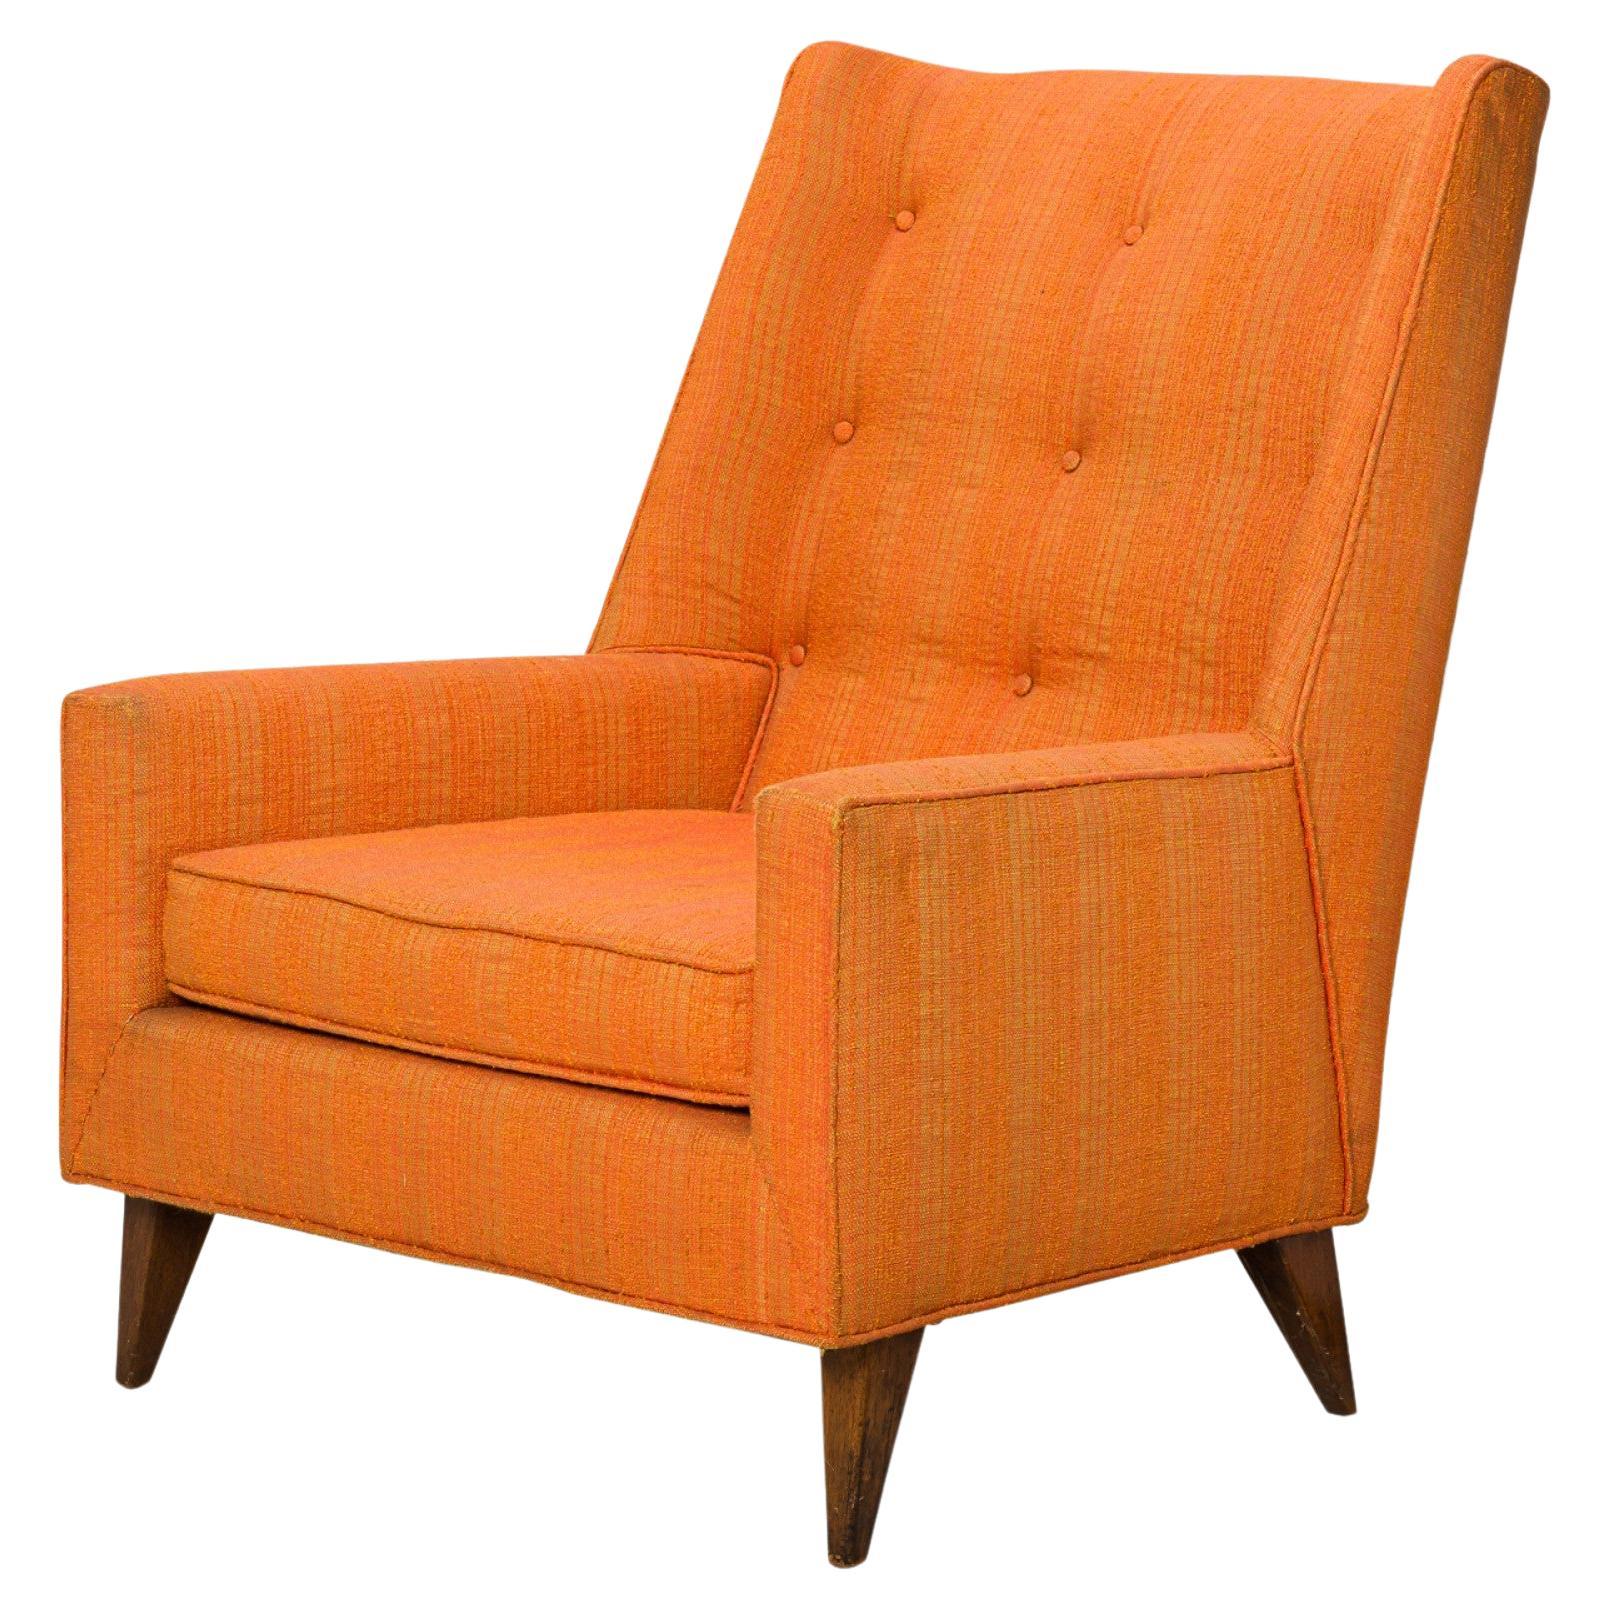 Harvey Probber Tall Back Orange Fabric Upholstered Arm / Lounge Chair For Sale